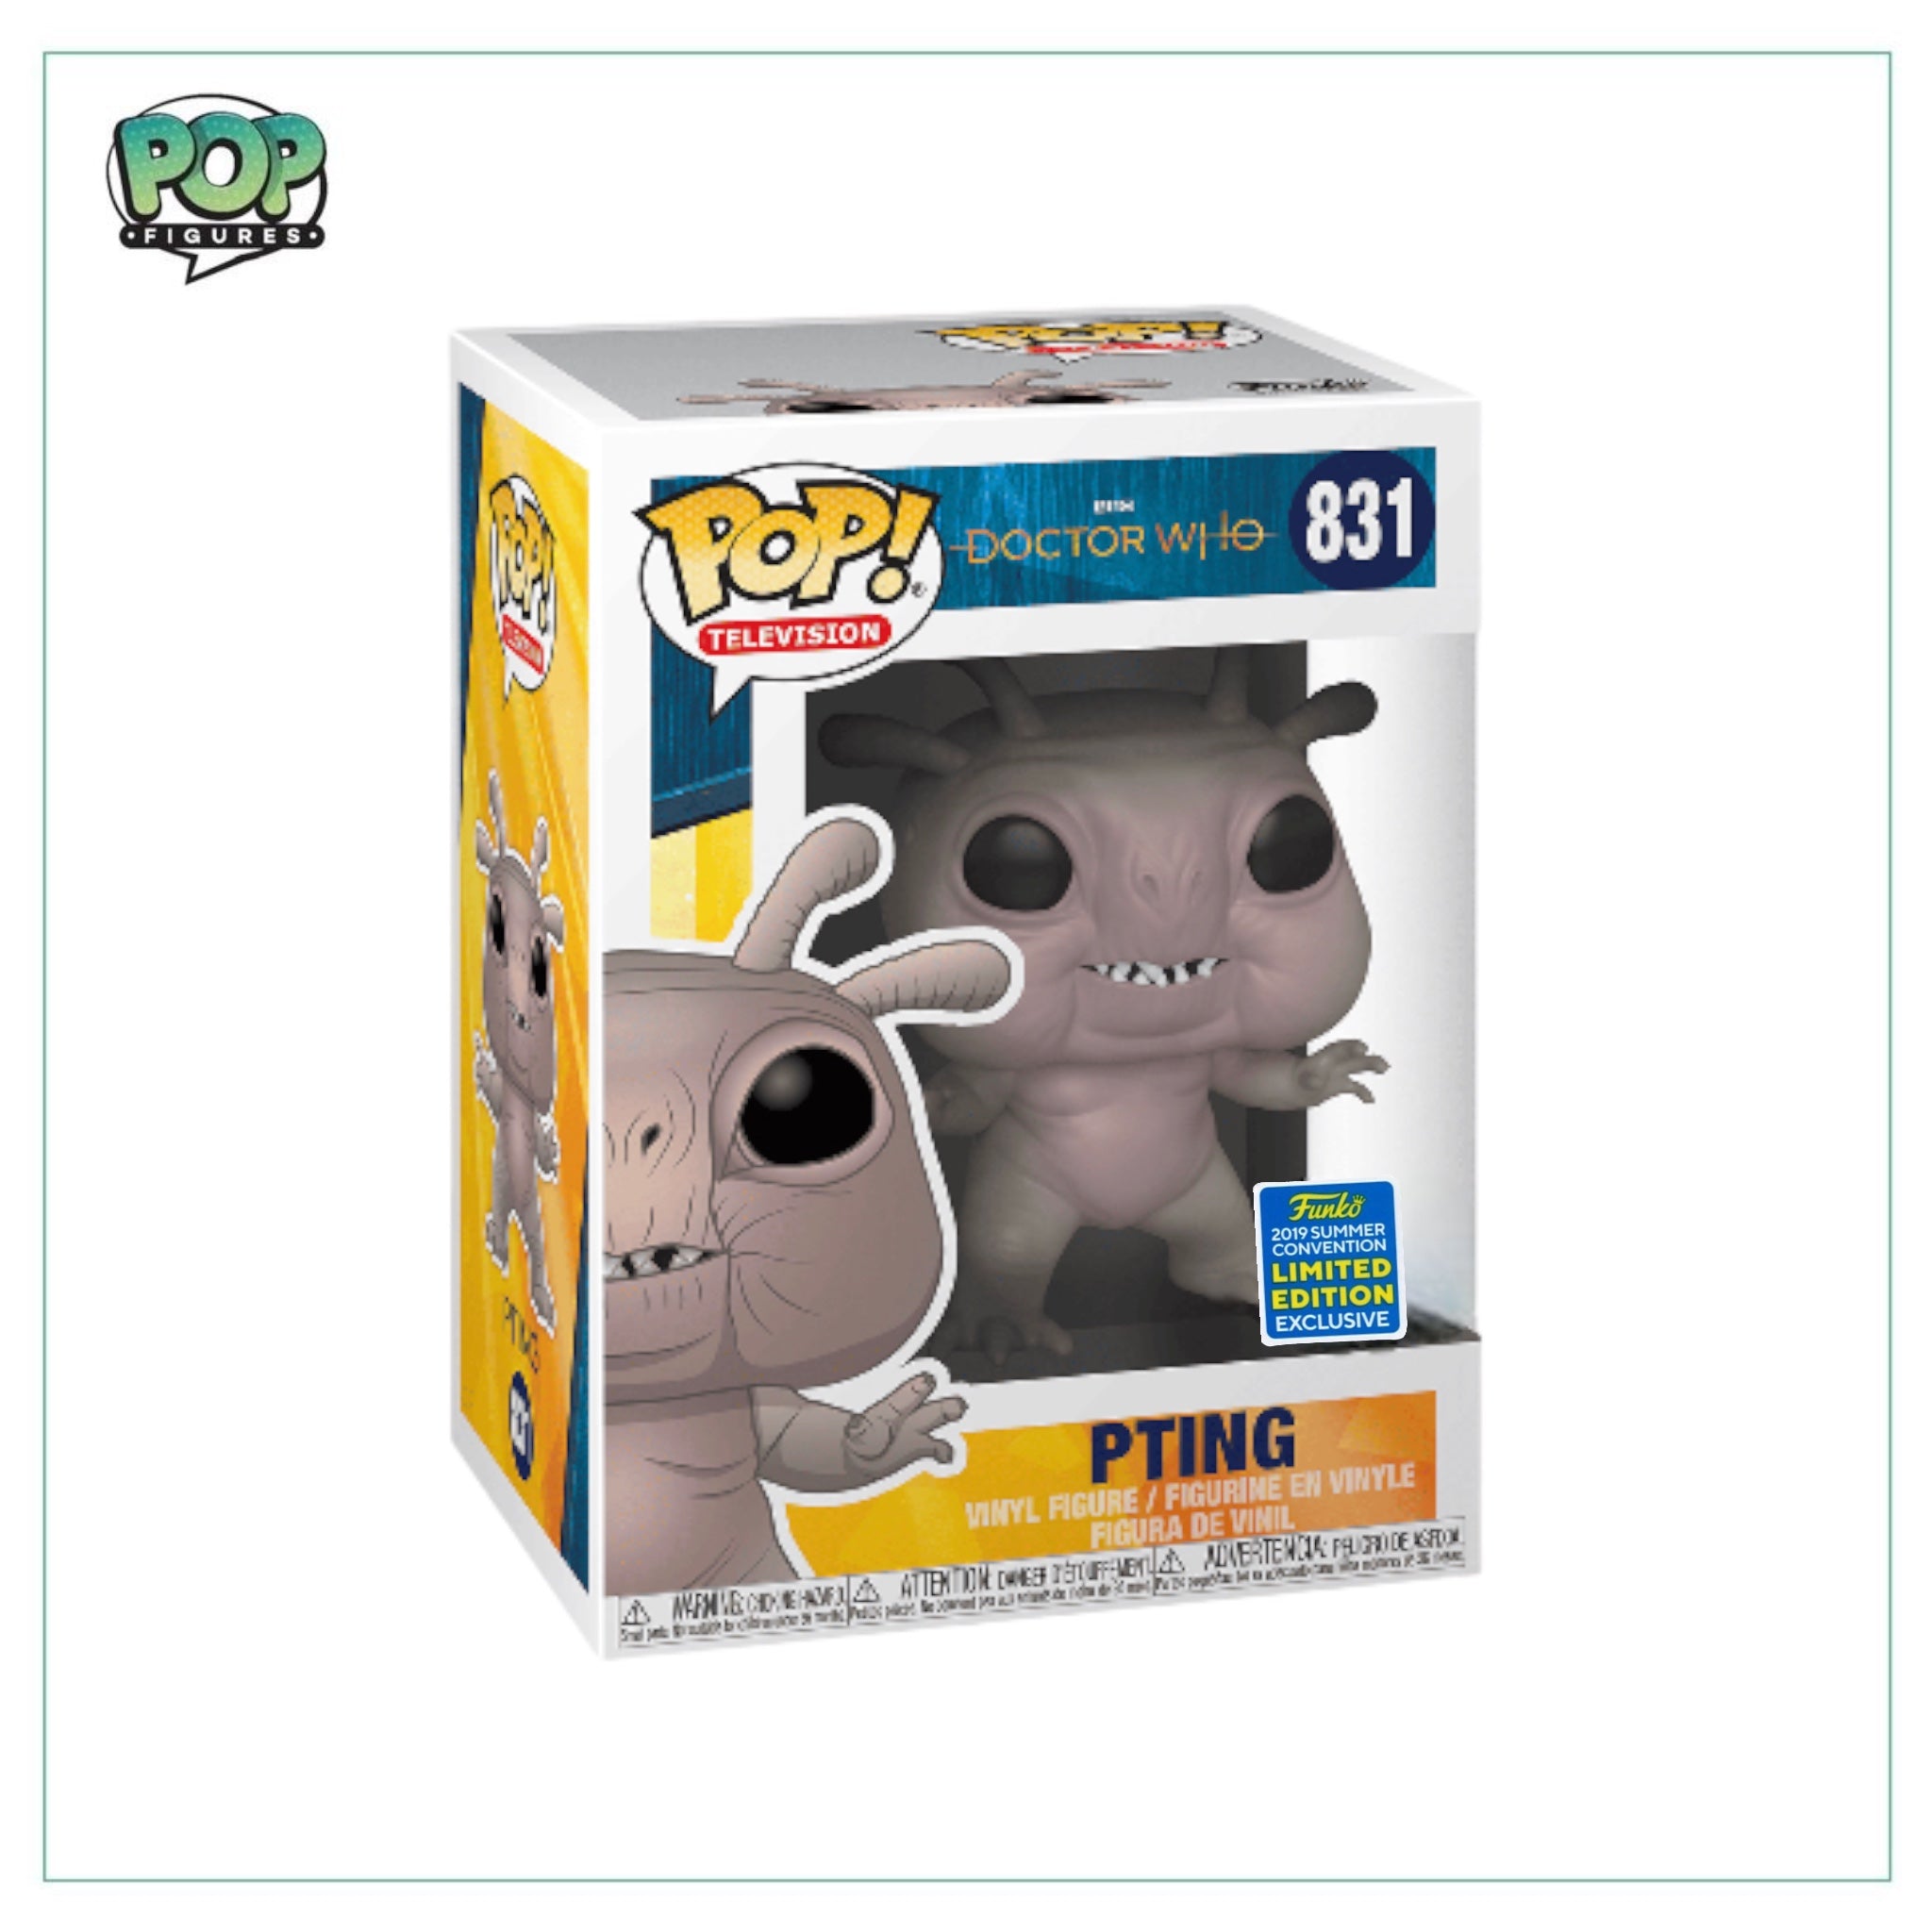 Pting #831 Funko Pop! - Doctor Who - 2019 Summer Convension Limited Edition Exclusive